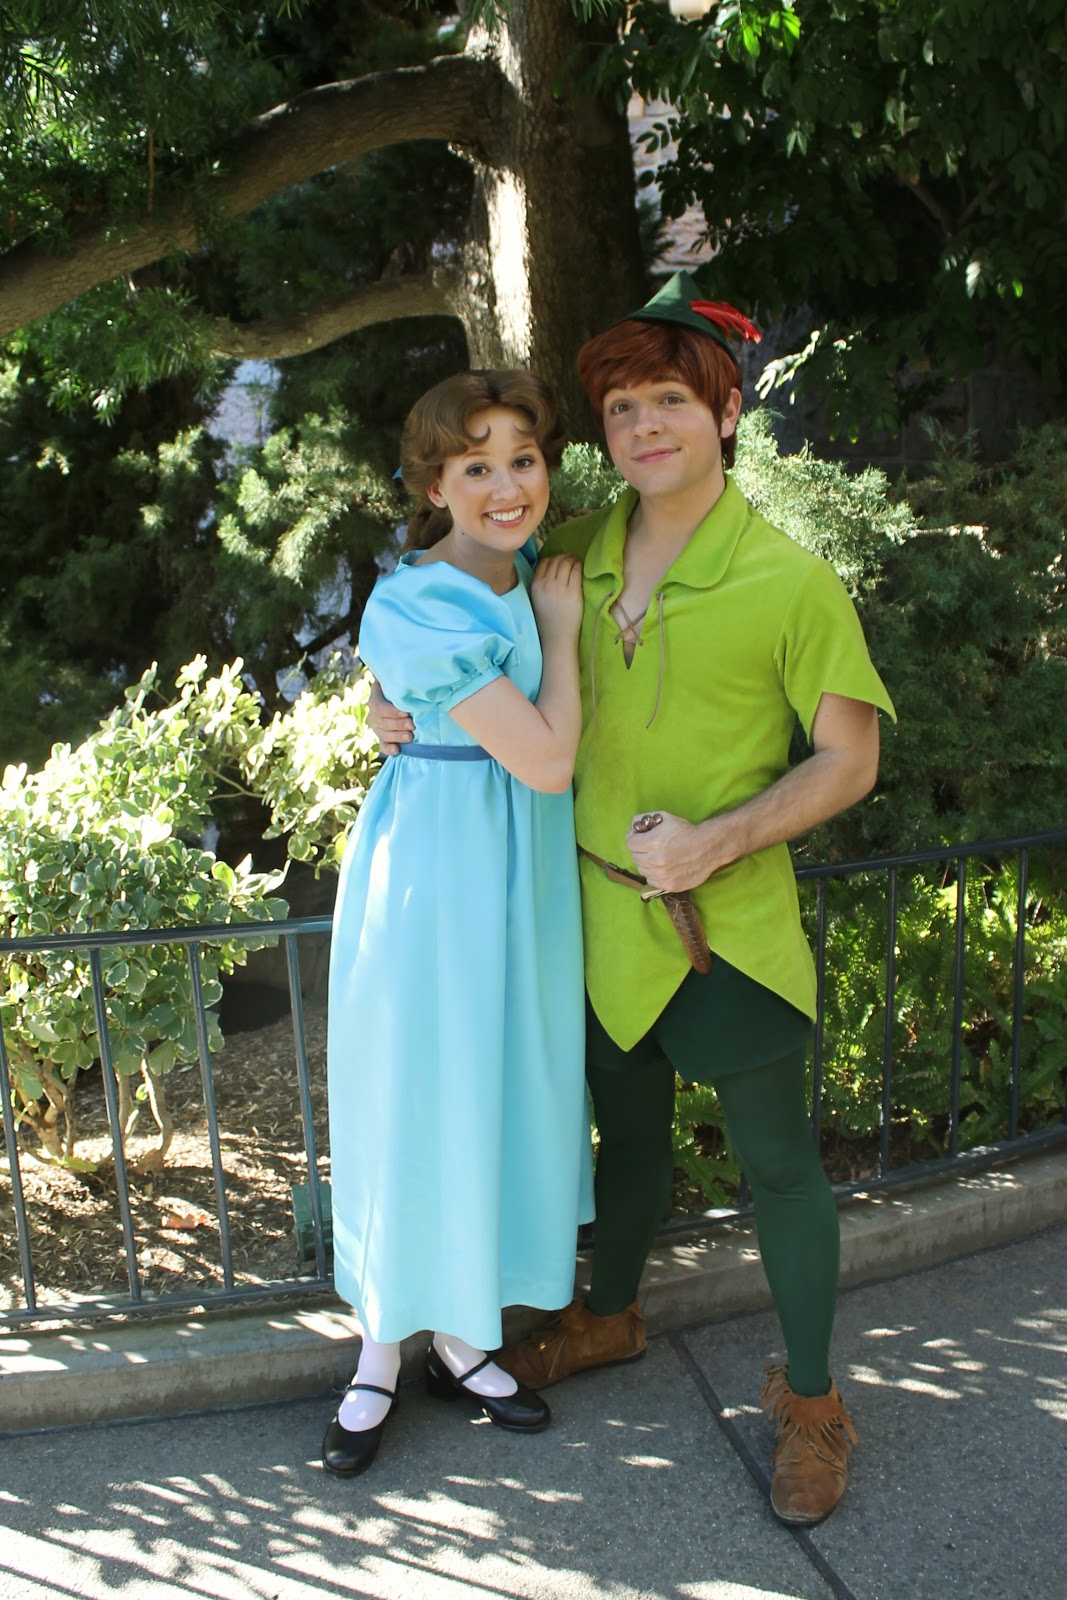 Unofficial Disney Character Hunting Guide: Disneyland Neverland 5K and